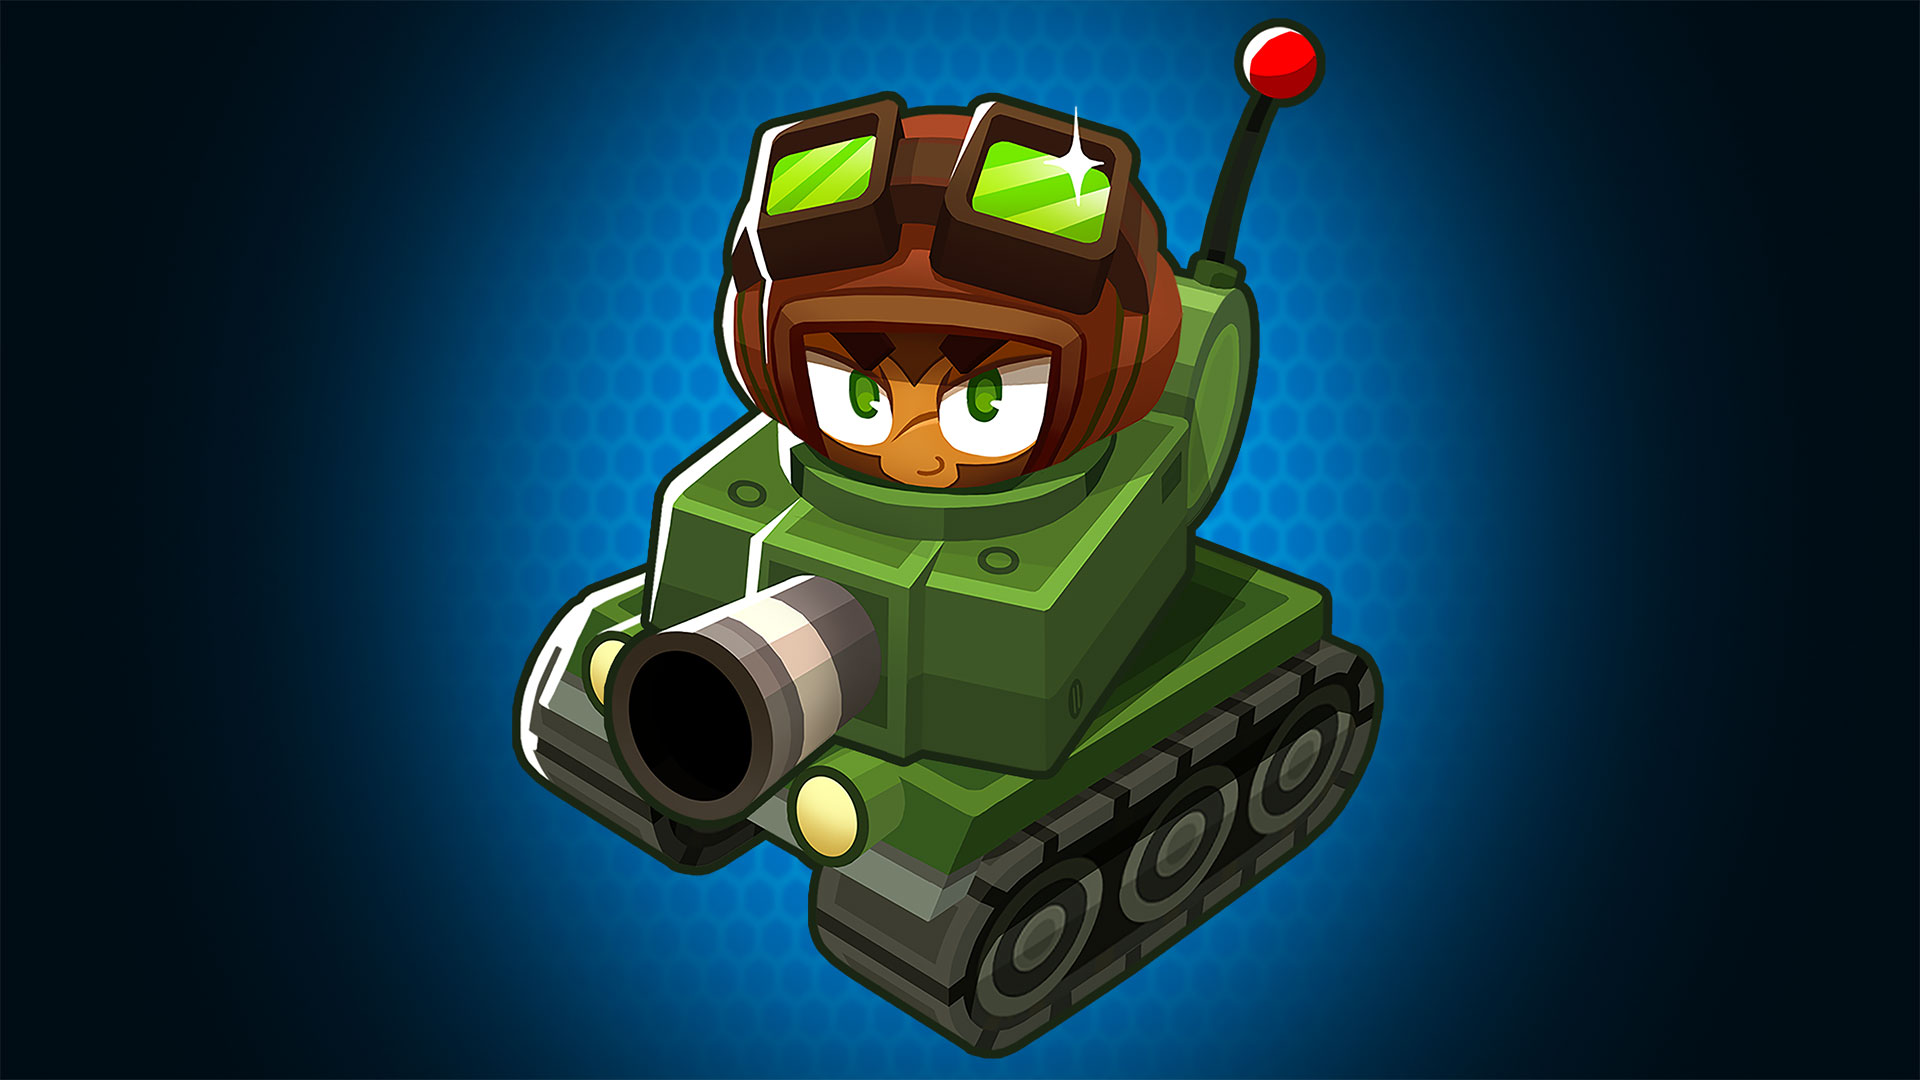 Bloons TD 6 HD desktop wallpaper featuring a cartoon monkey in a military tank against a blue background.